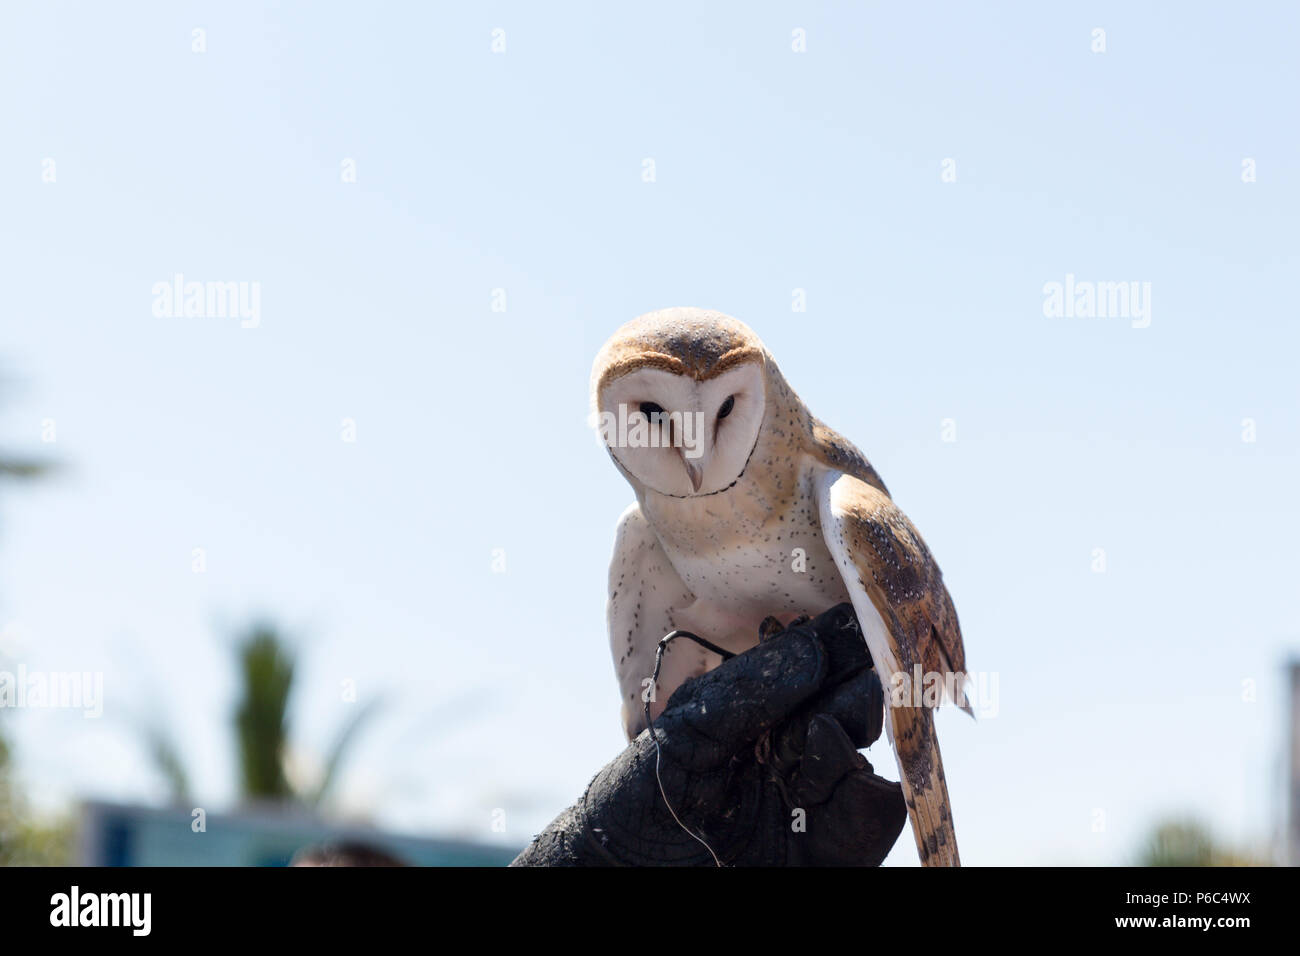 owl on the hand of a person practicing falconry Stock Photo